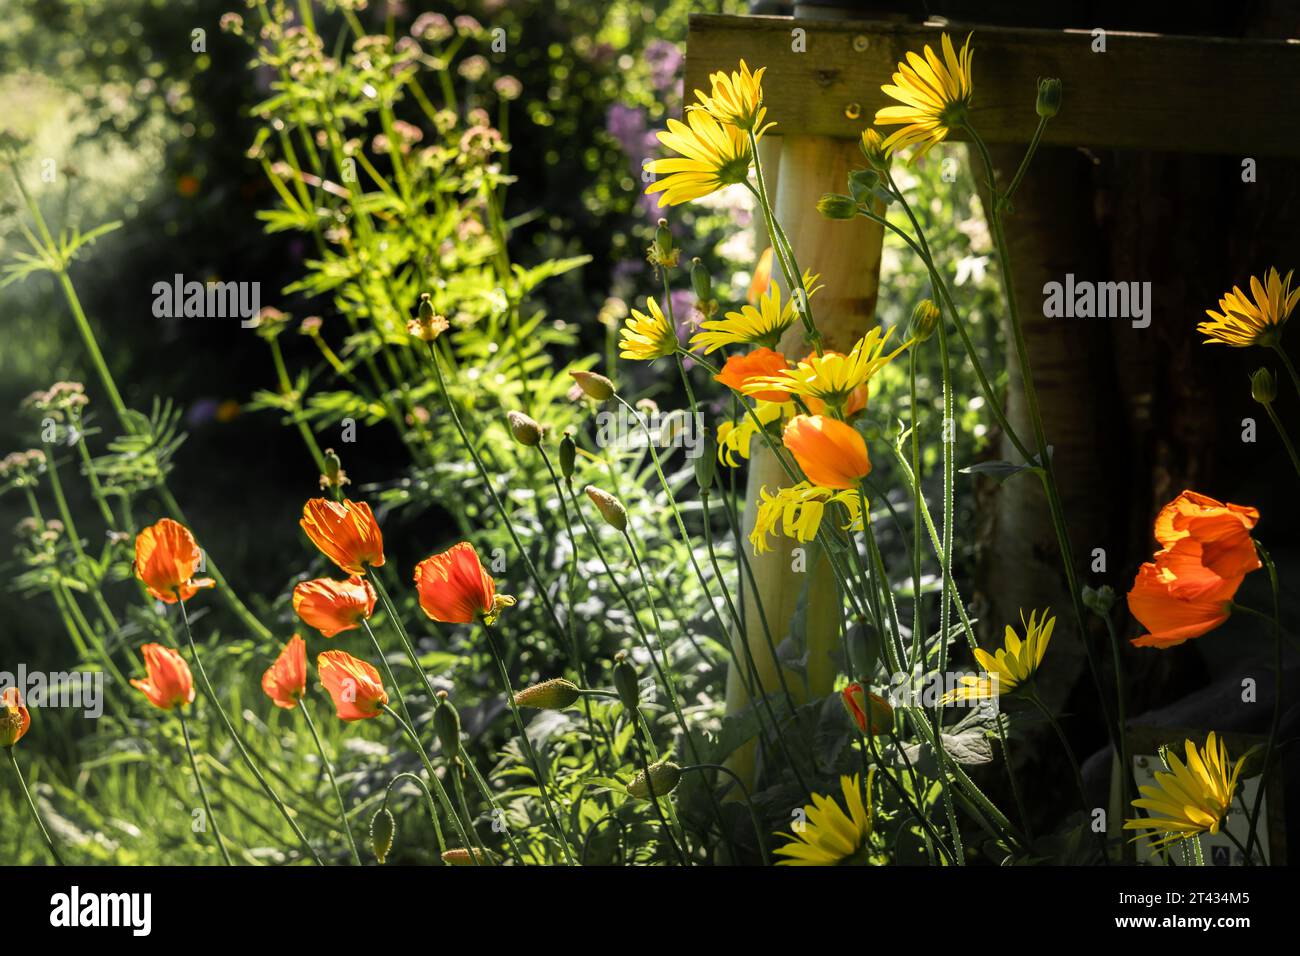 Orange poppy and golden aster flowers blooming under the wooden fence in the garden. Stock Photo